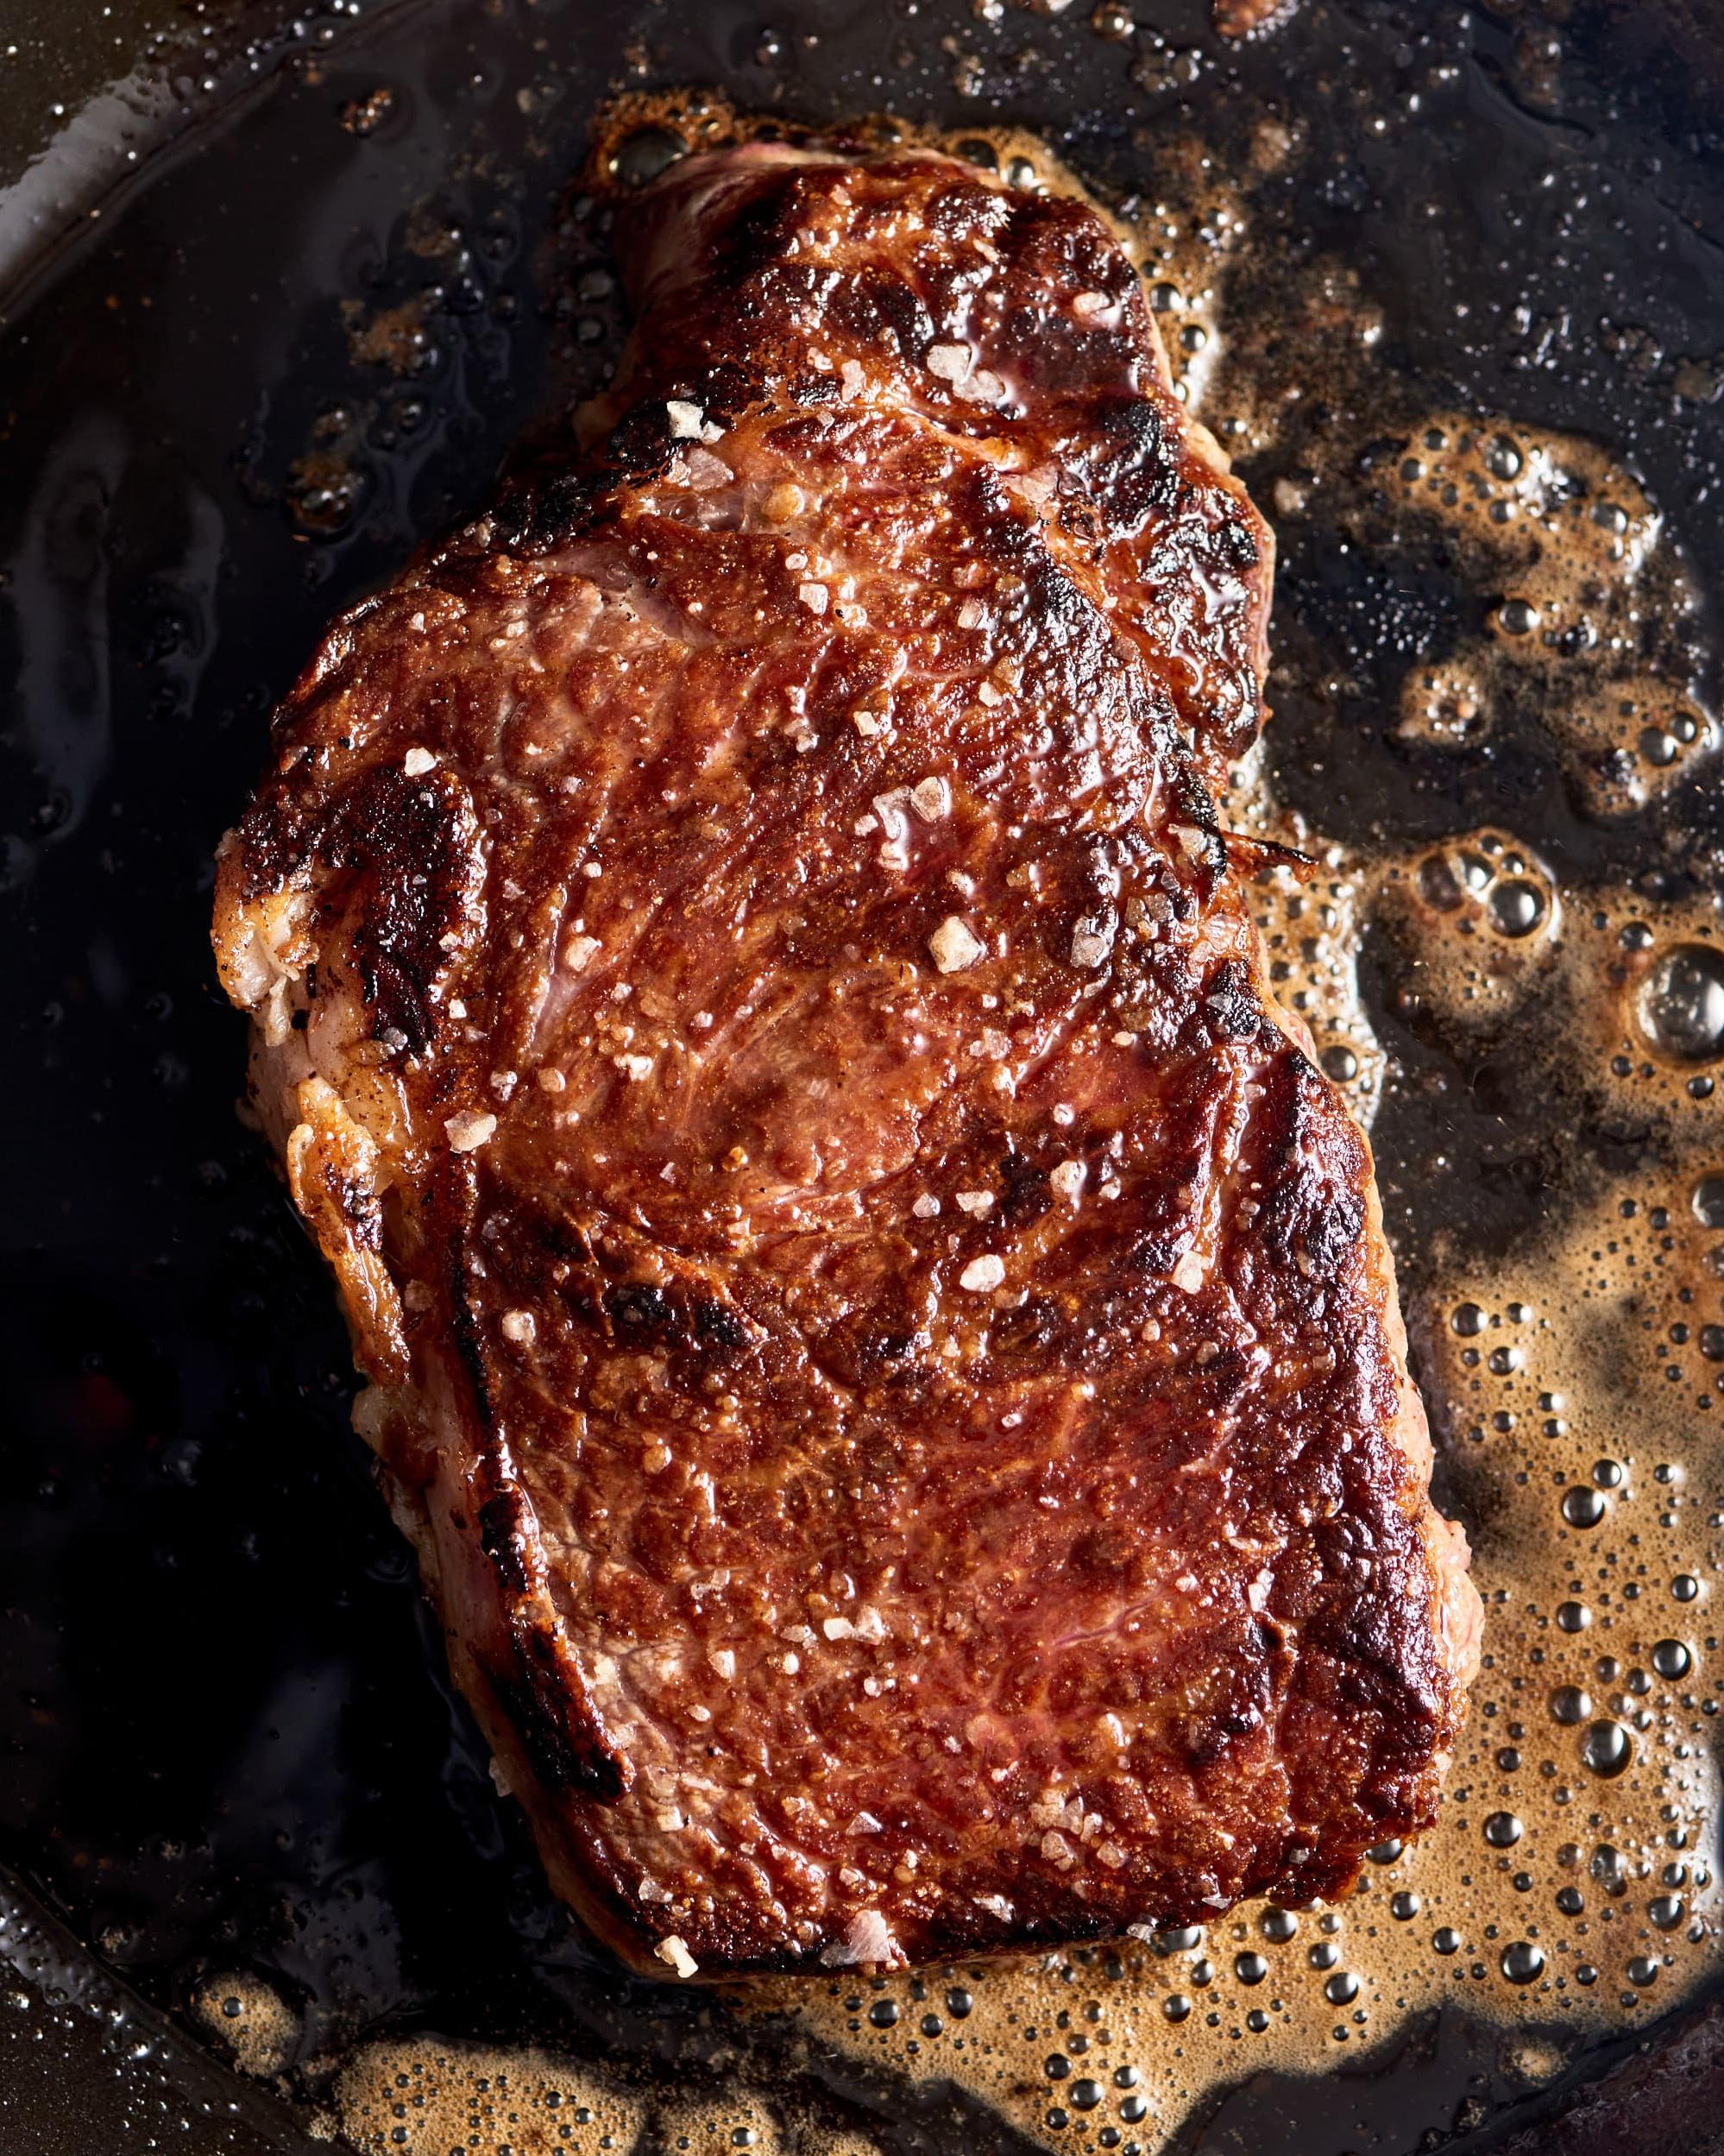  Who said steak can’t be dressed up? This red wine butter sauce proves otherwise.